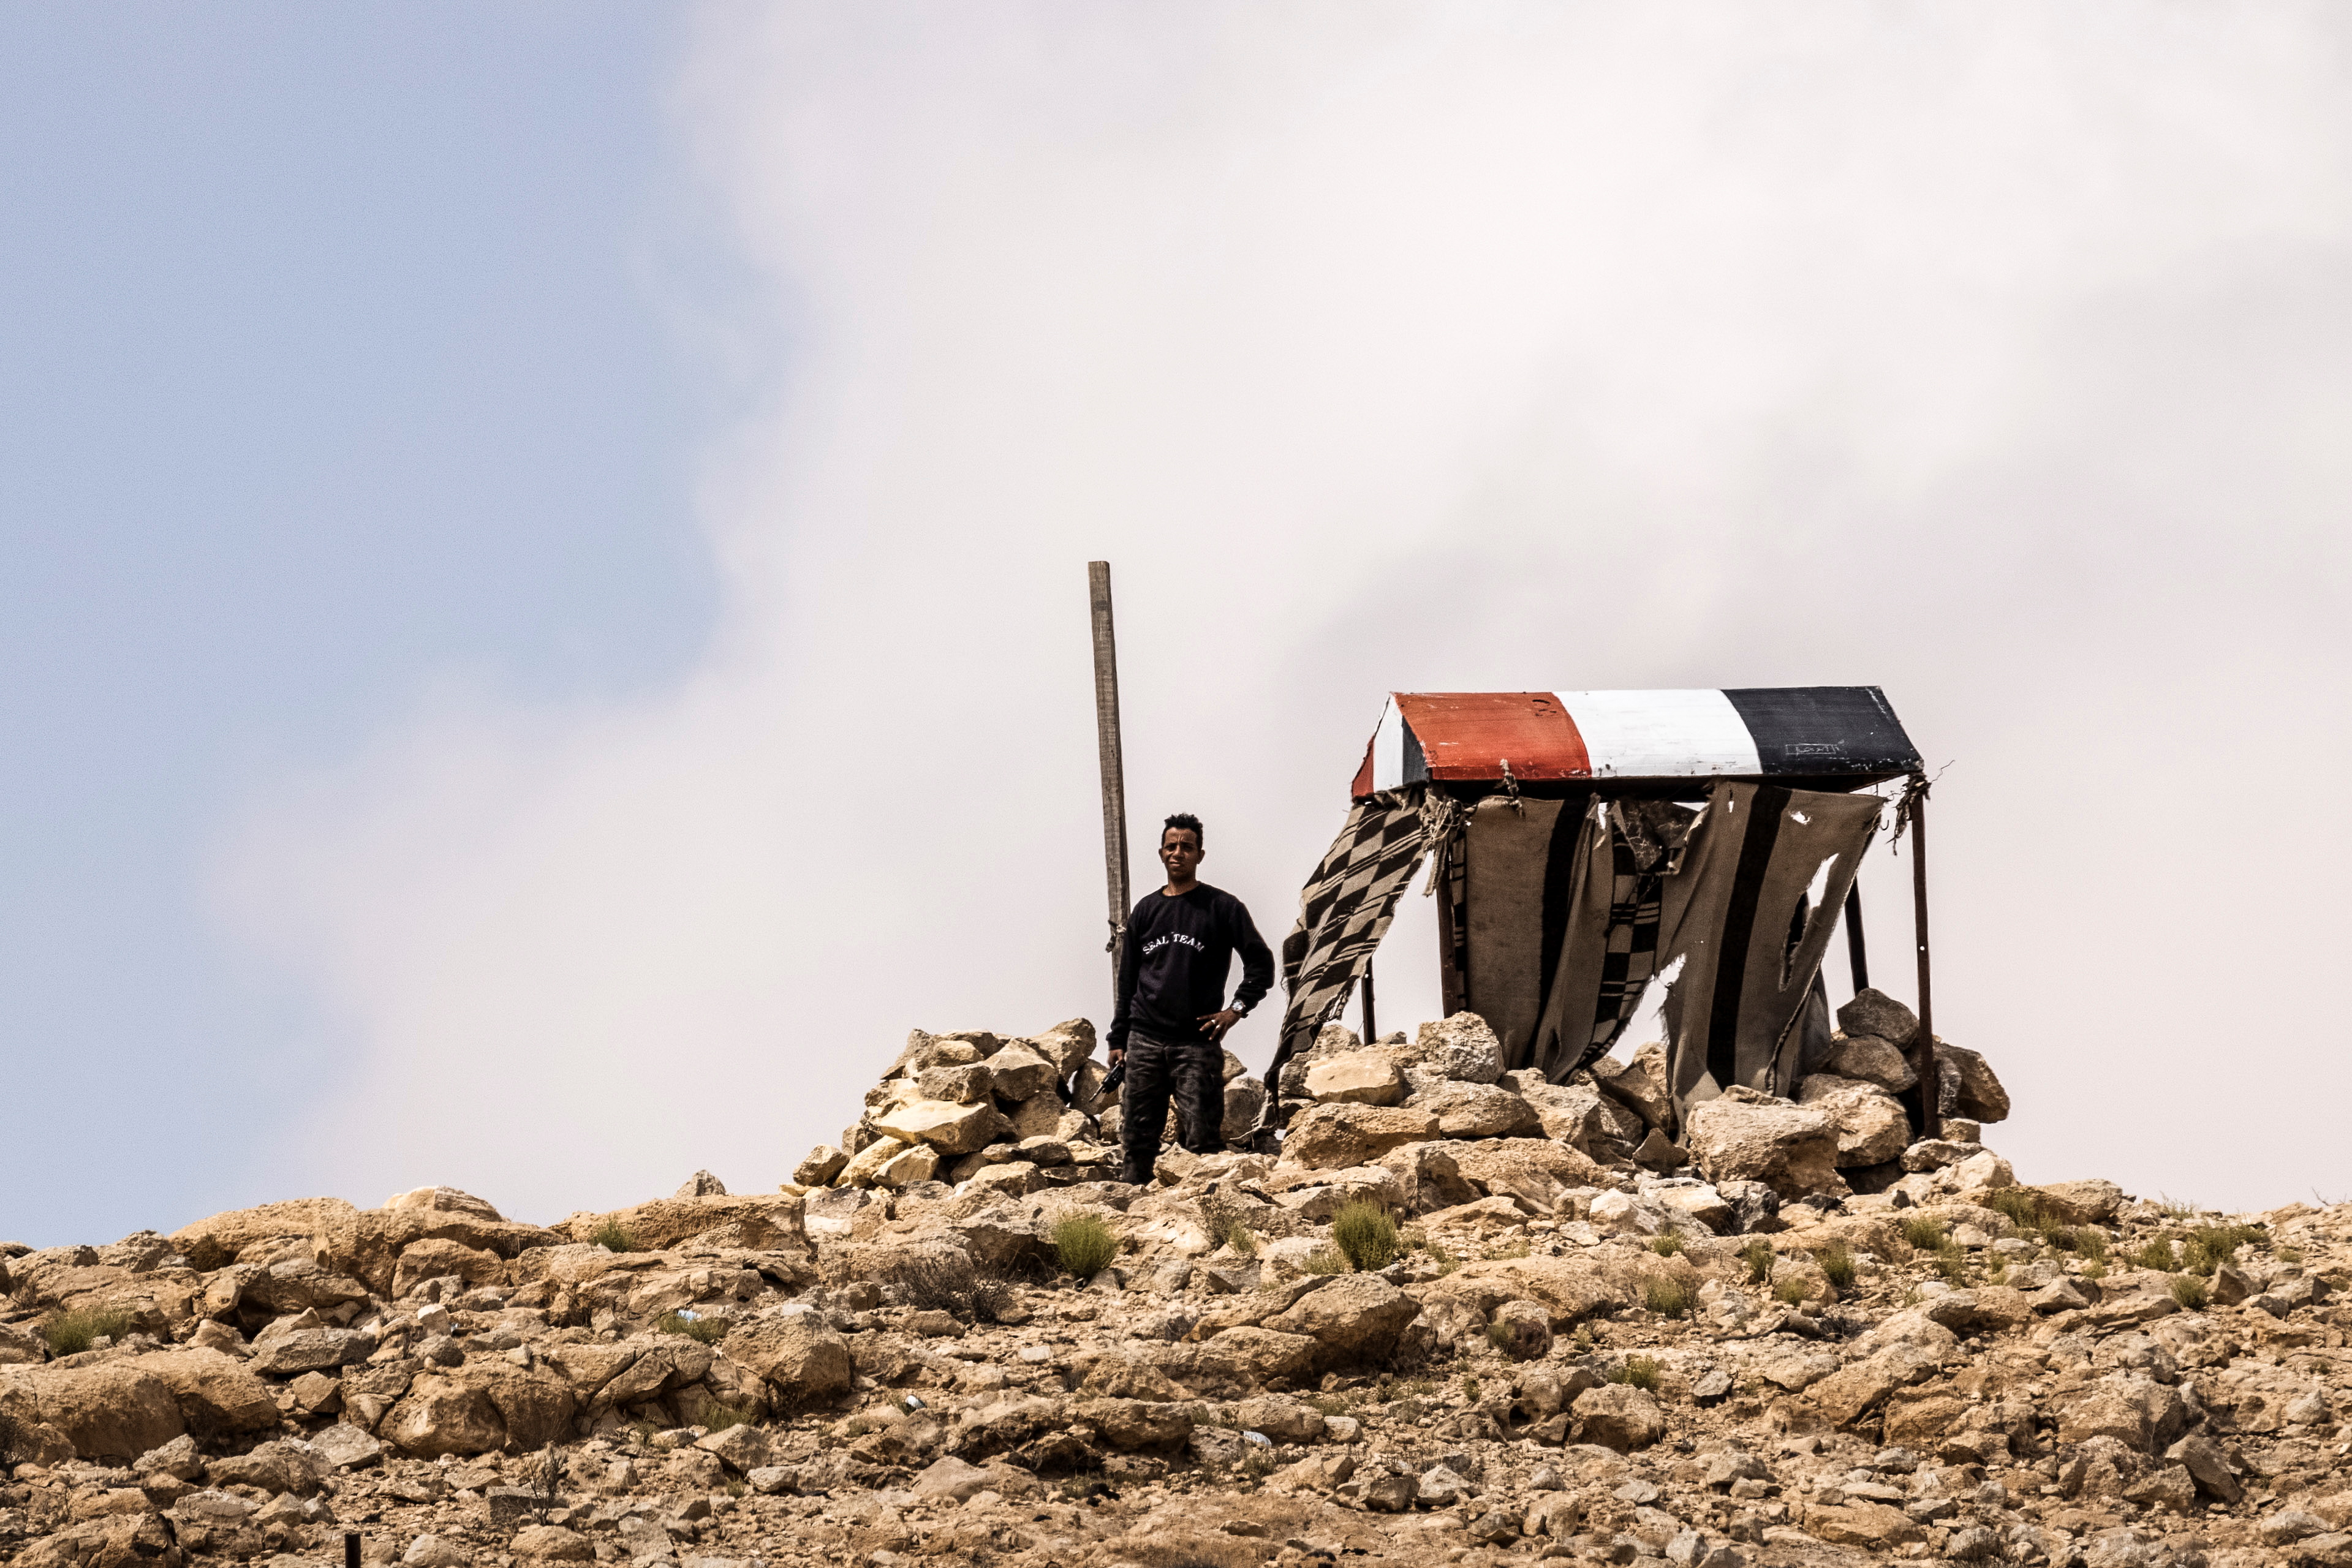 An Egyptian man looks on by an Egyptian military outpost at the Israel-Egypt border as seen from southern Israel